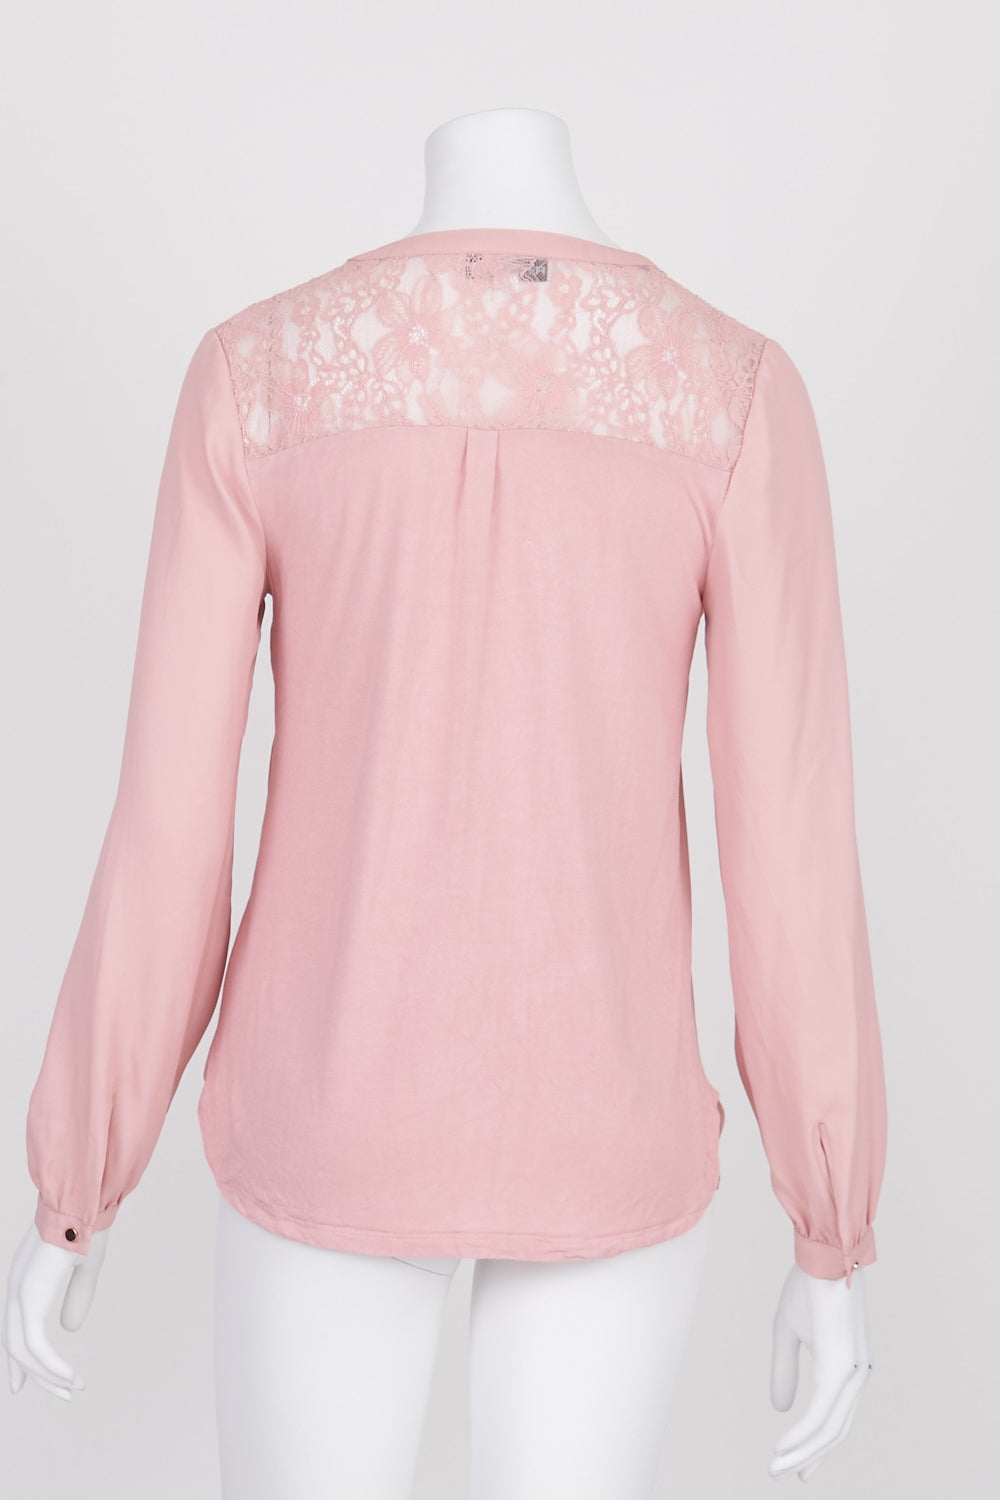 Forever New Pink Long Sleeve Top XS